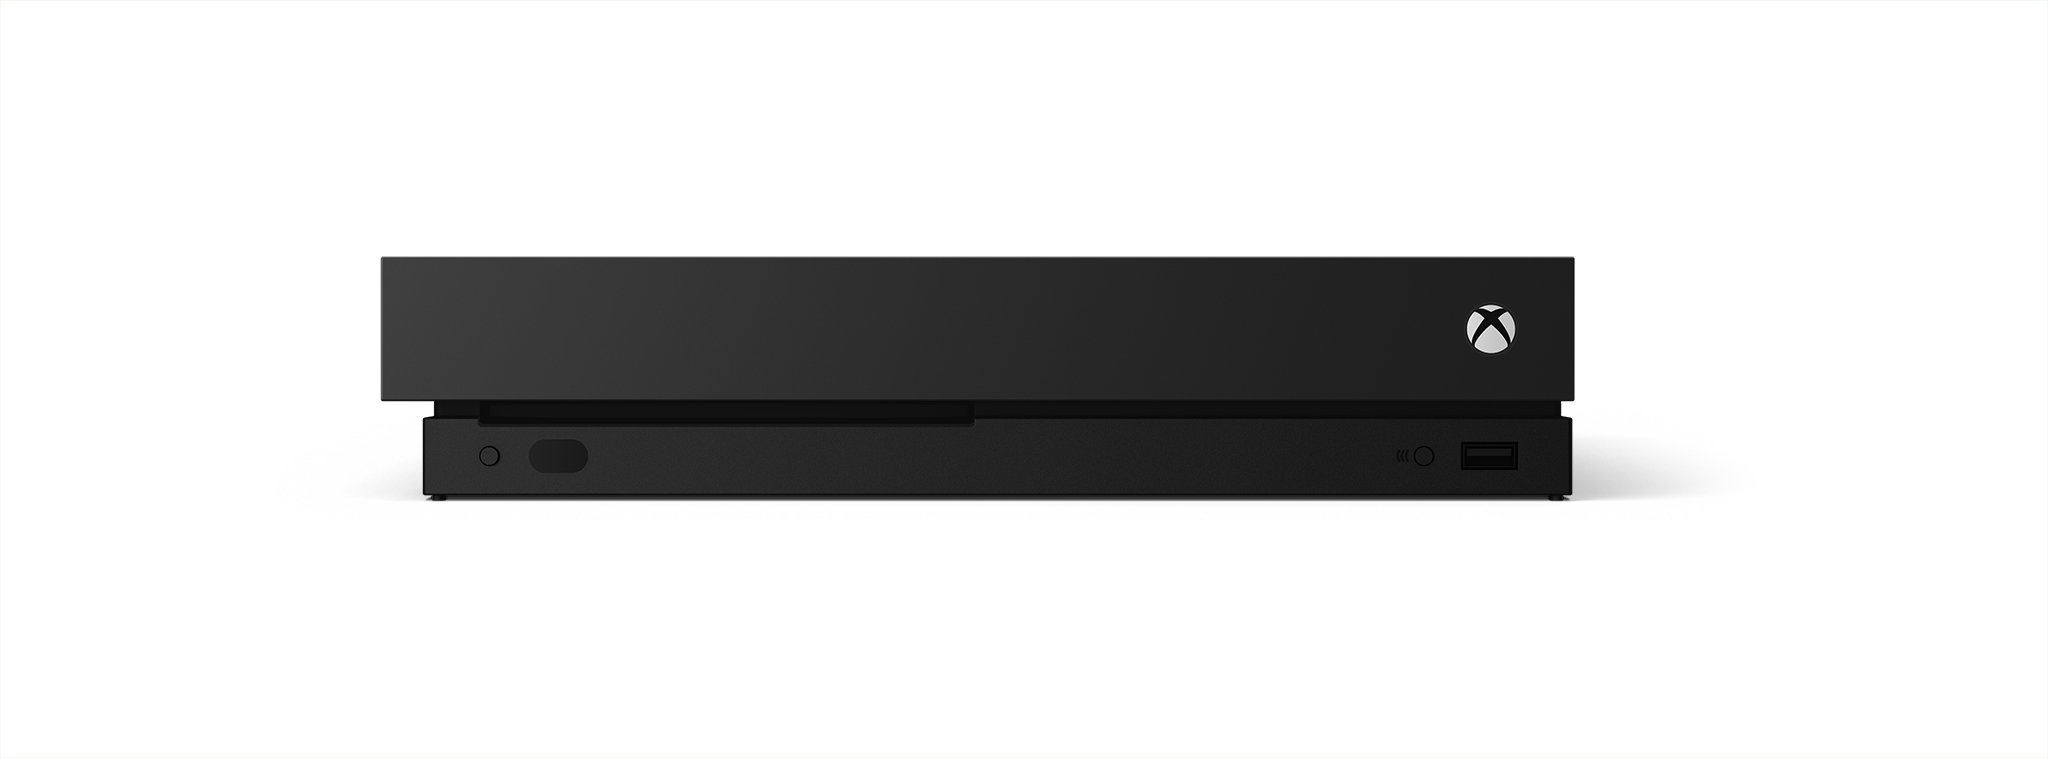 Xbox One X Front